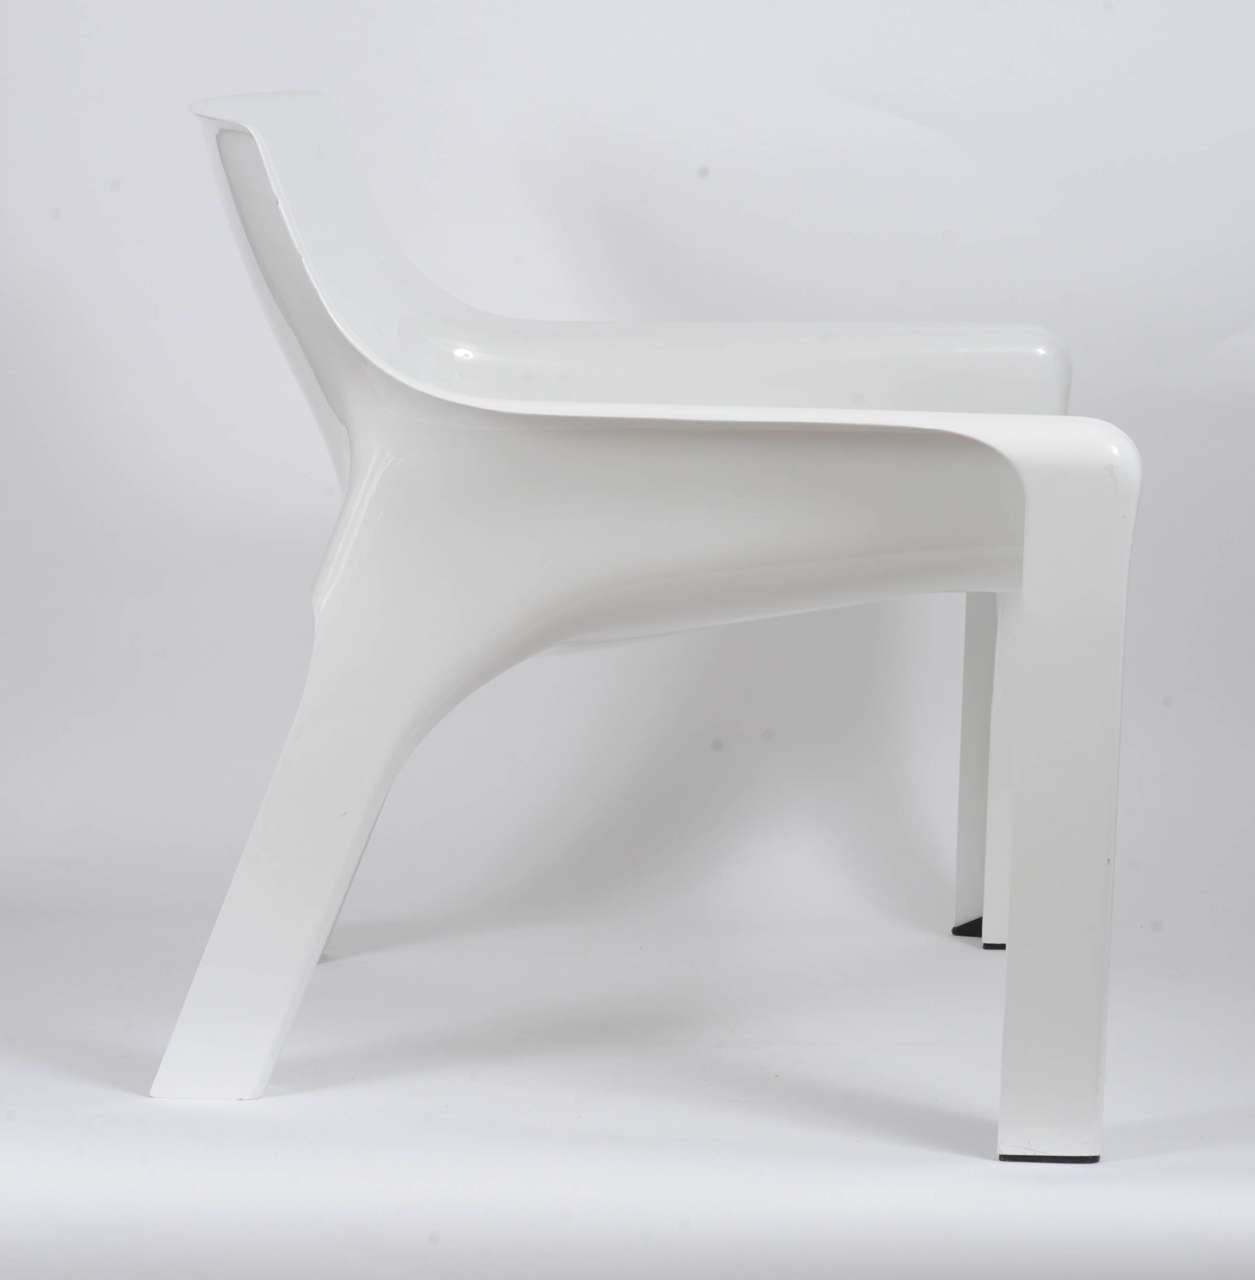 Space Age Vicario Chair by Vico Magistretti for Artemide